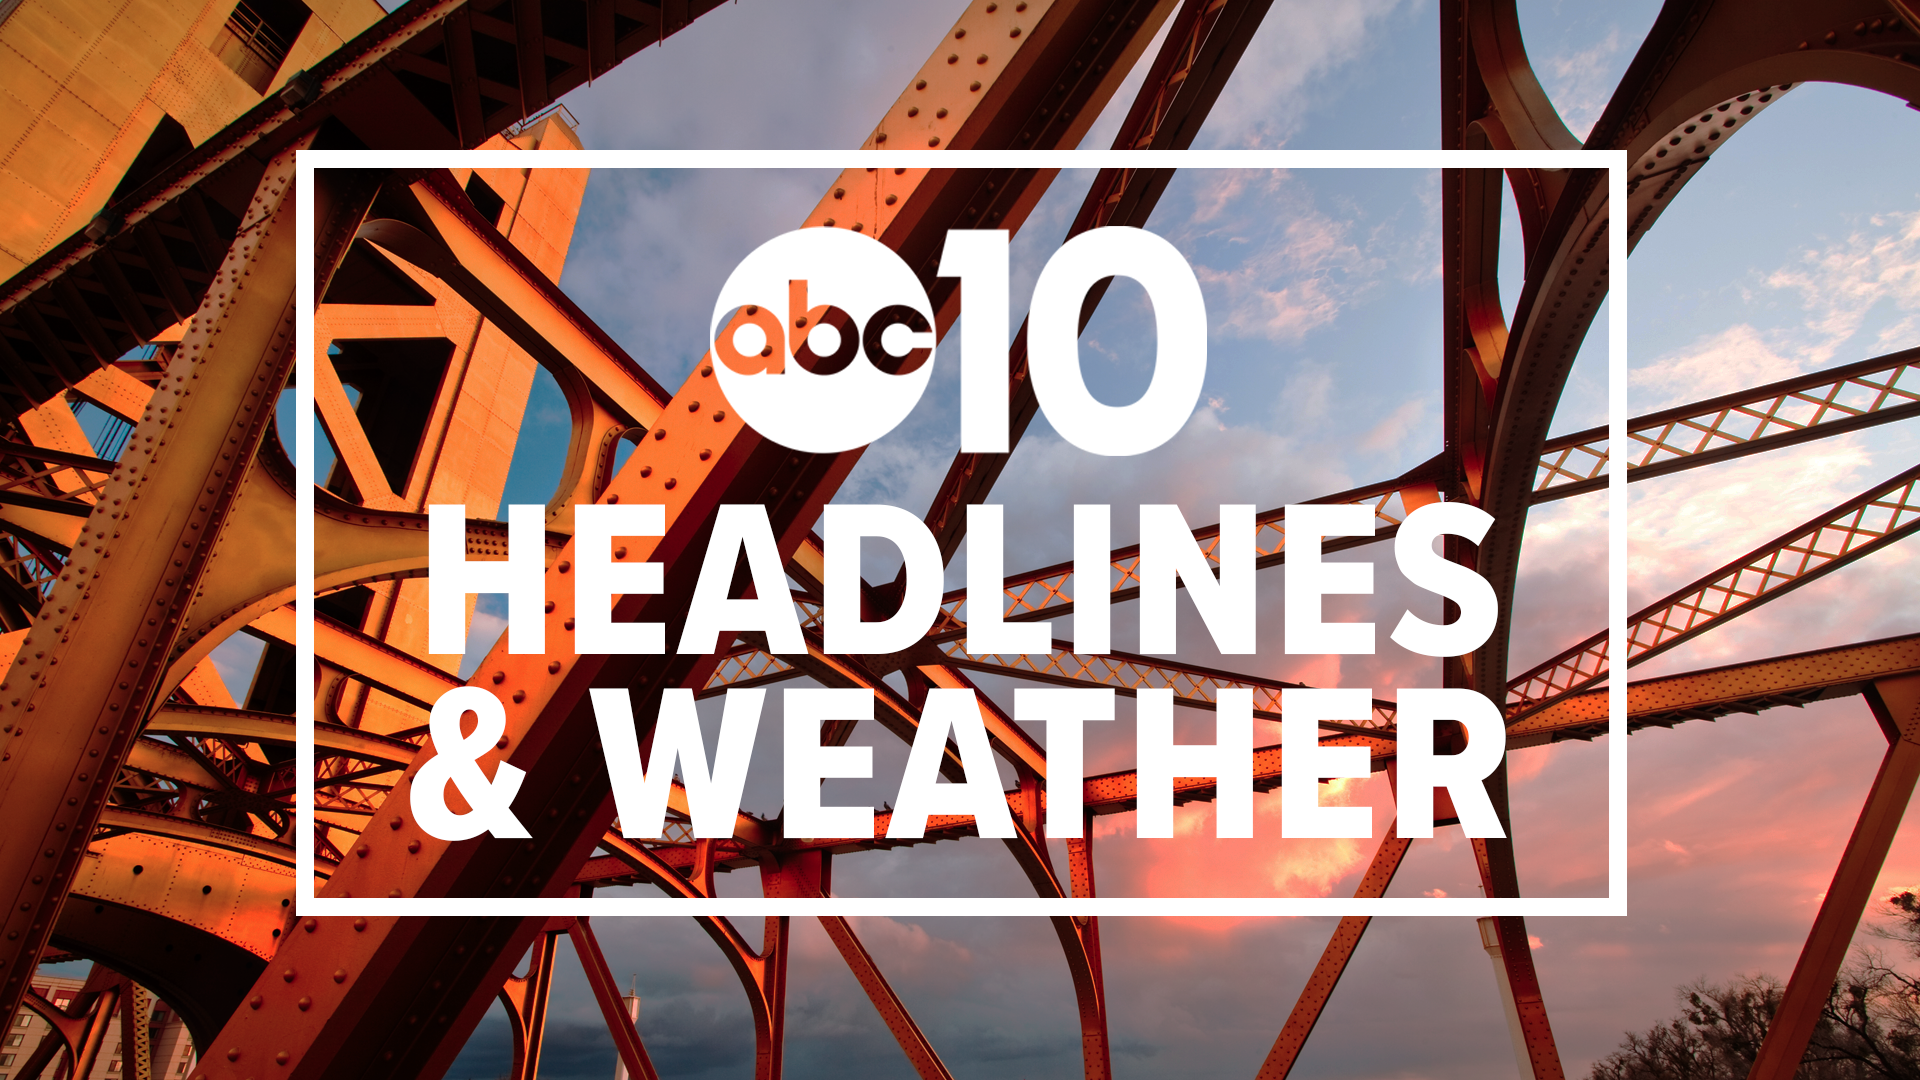 Morning Headlines: March 16, 2020 | Watch #MorningBlend10 weekdays at 5-7 a.m. and Morning Blend's #ExtraShot at 11 a.m. for everything you need to know!